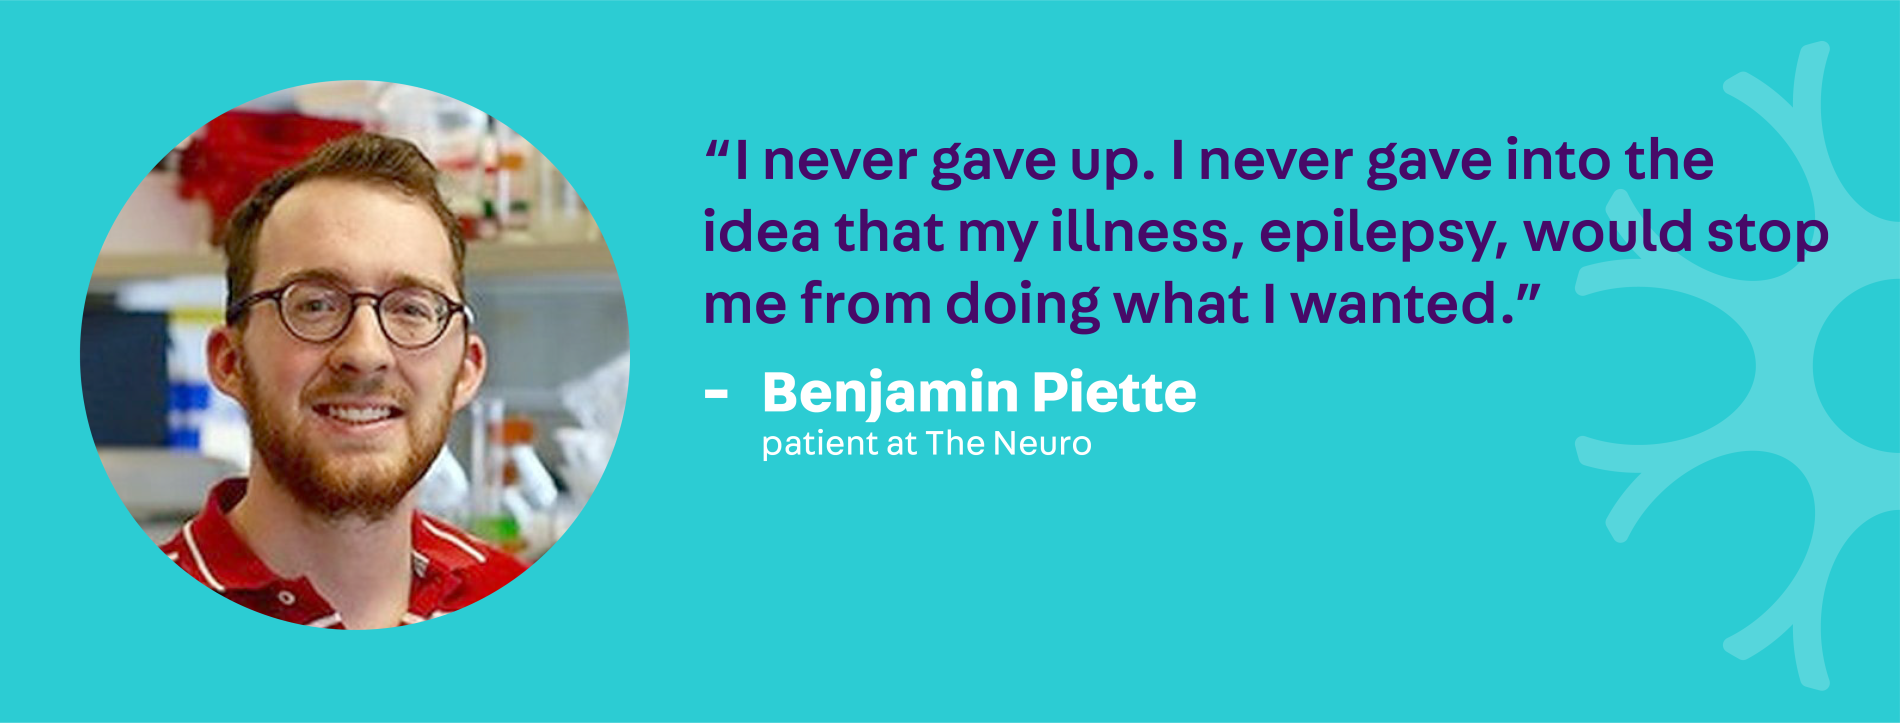 "I never game up. I never gave into the idea that my illness, epilepsy, would stop me from doing what I wanted." - Benjamin Piette, patient at The Neuro 